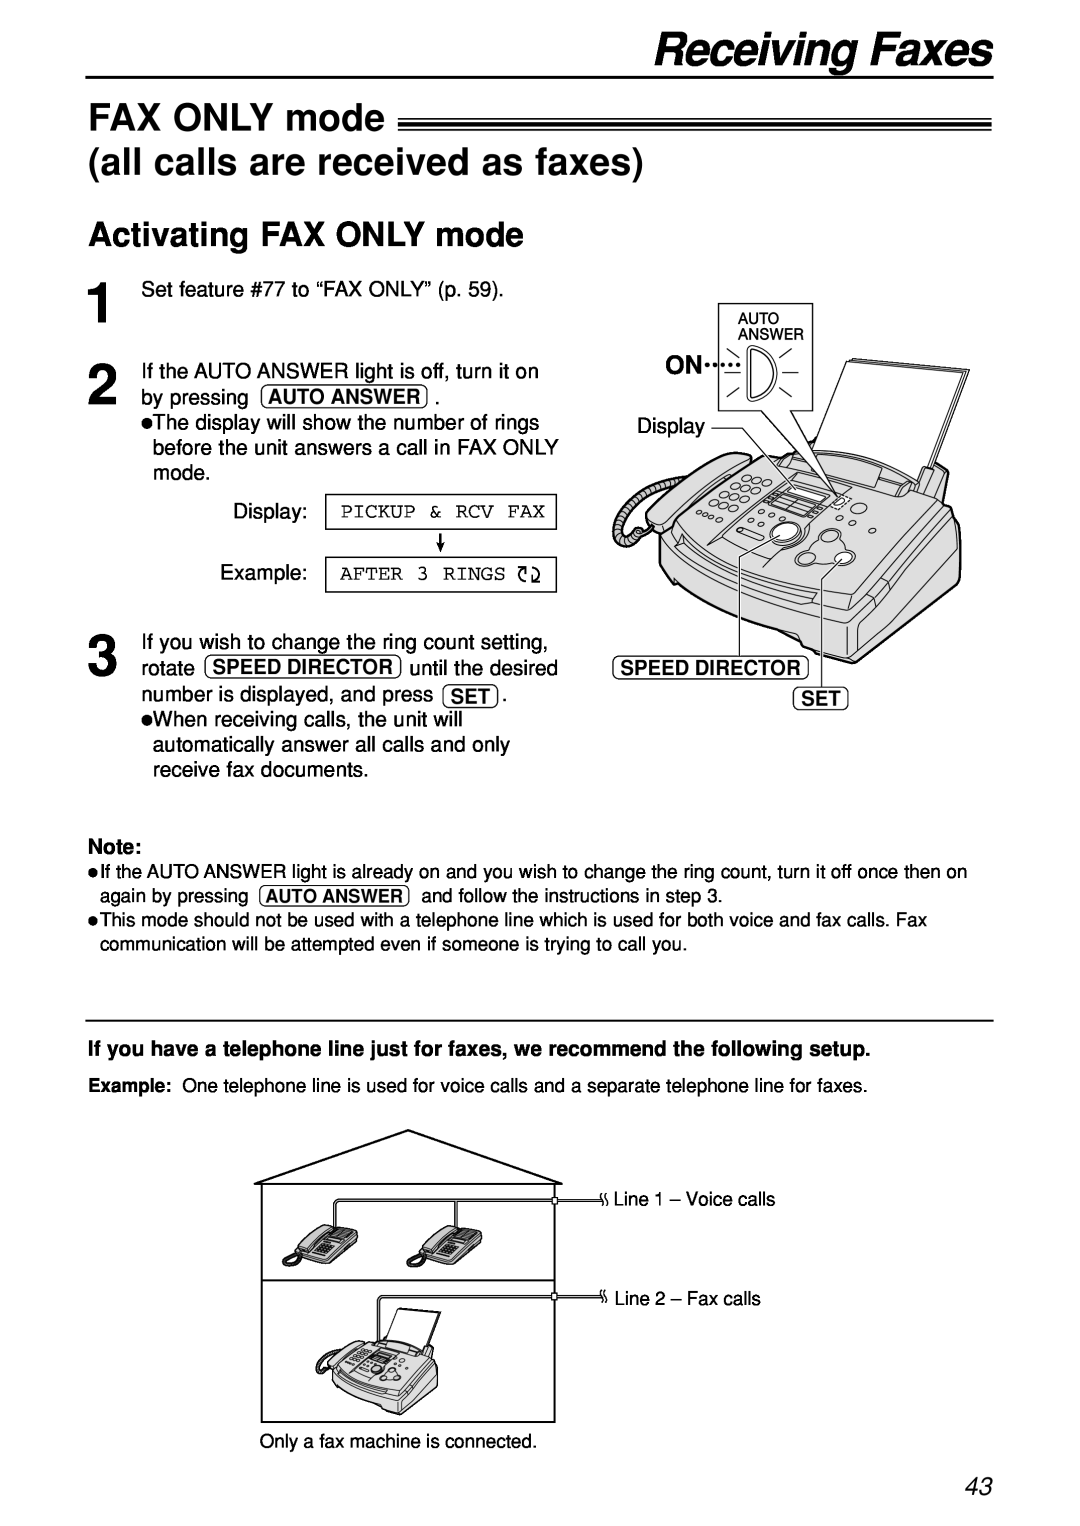 Panasonic KX-FL501C manual FAX ONLY mode all calls are received as faxes, Activating FAX ONLY mode, Receiving Faxes 